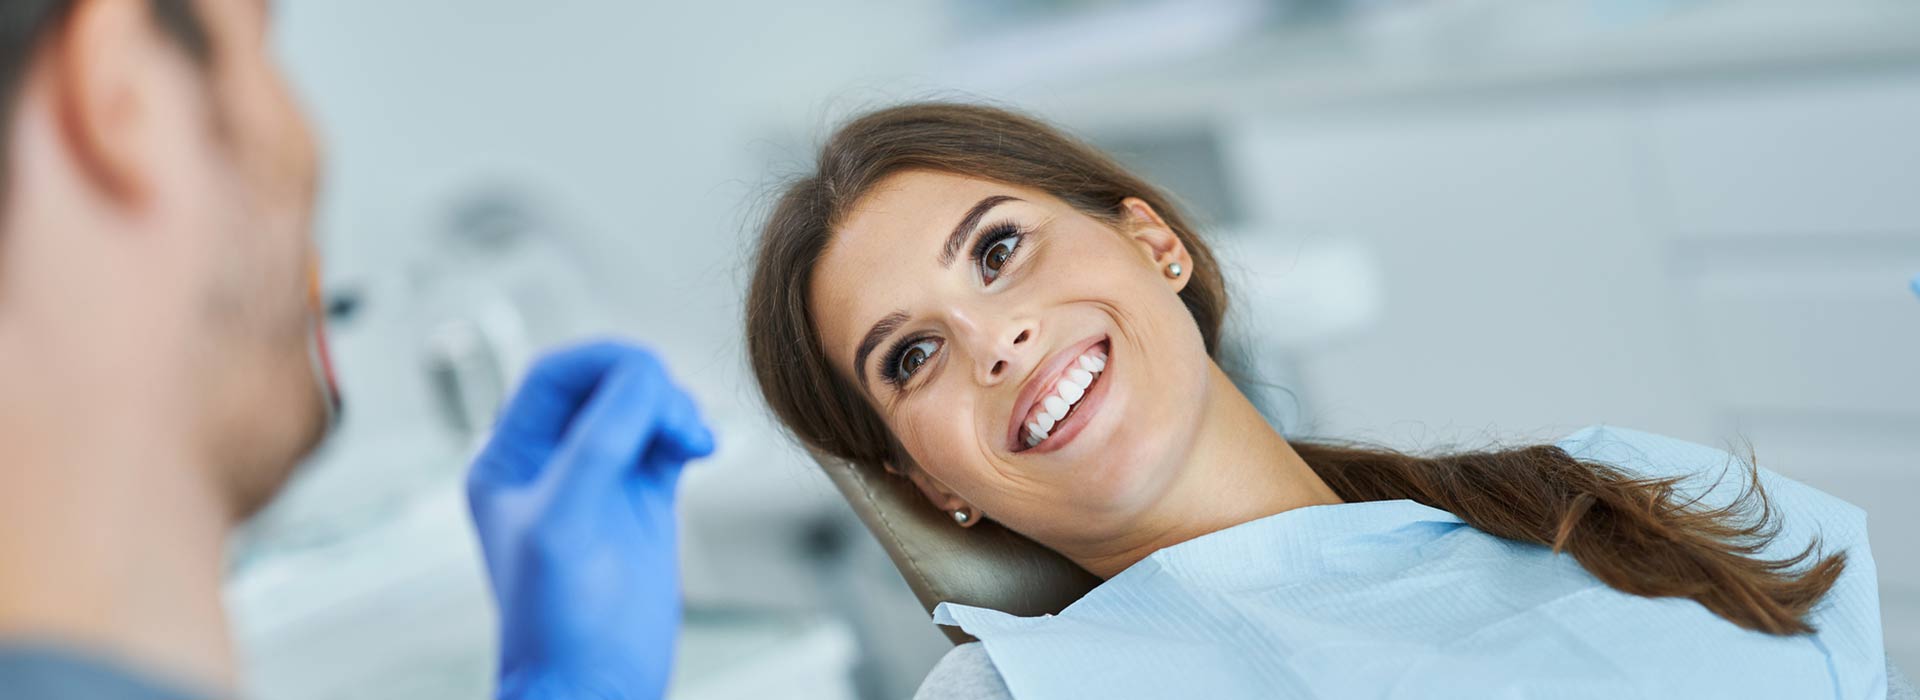 A woman is smiling happily after smile dental crowns.